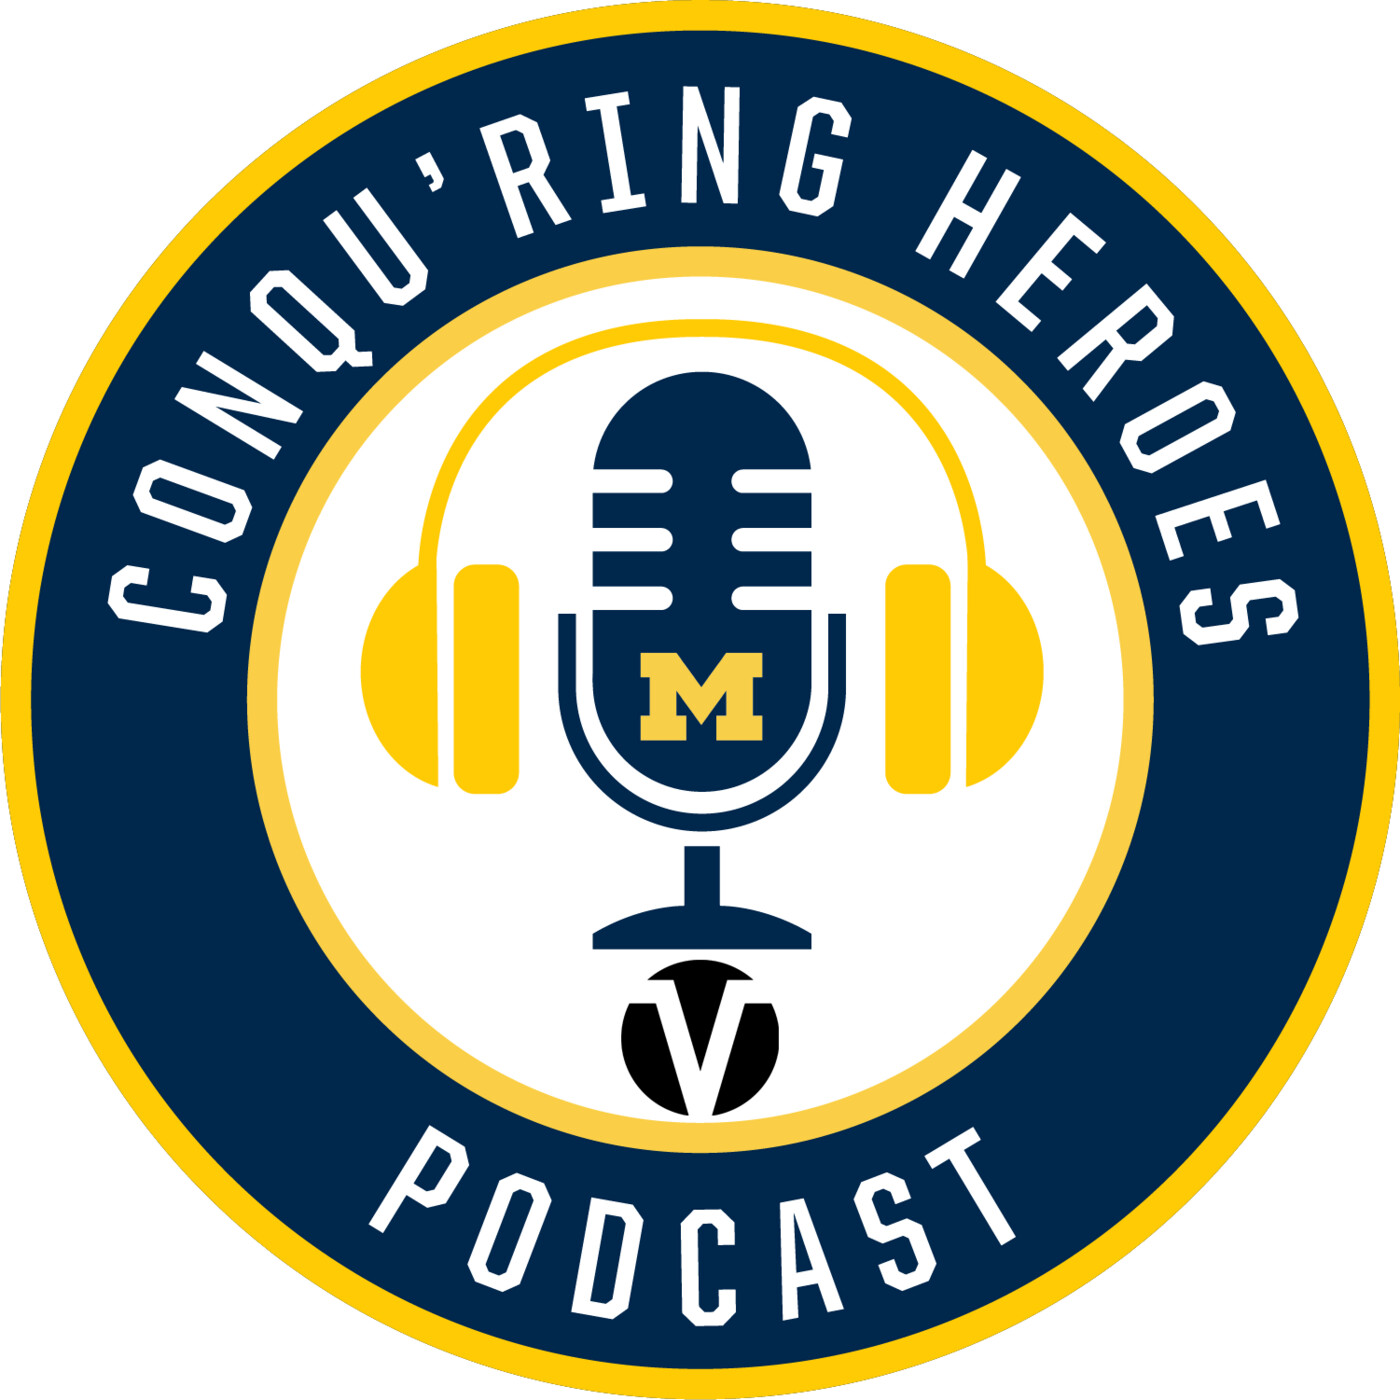 Conqu'ring Heroes 131 - Mark Rothstein